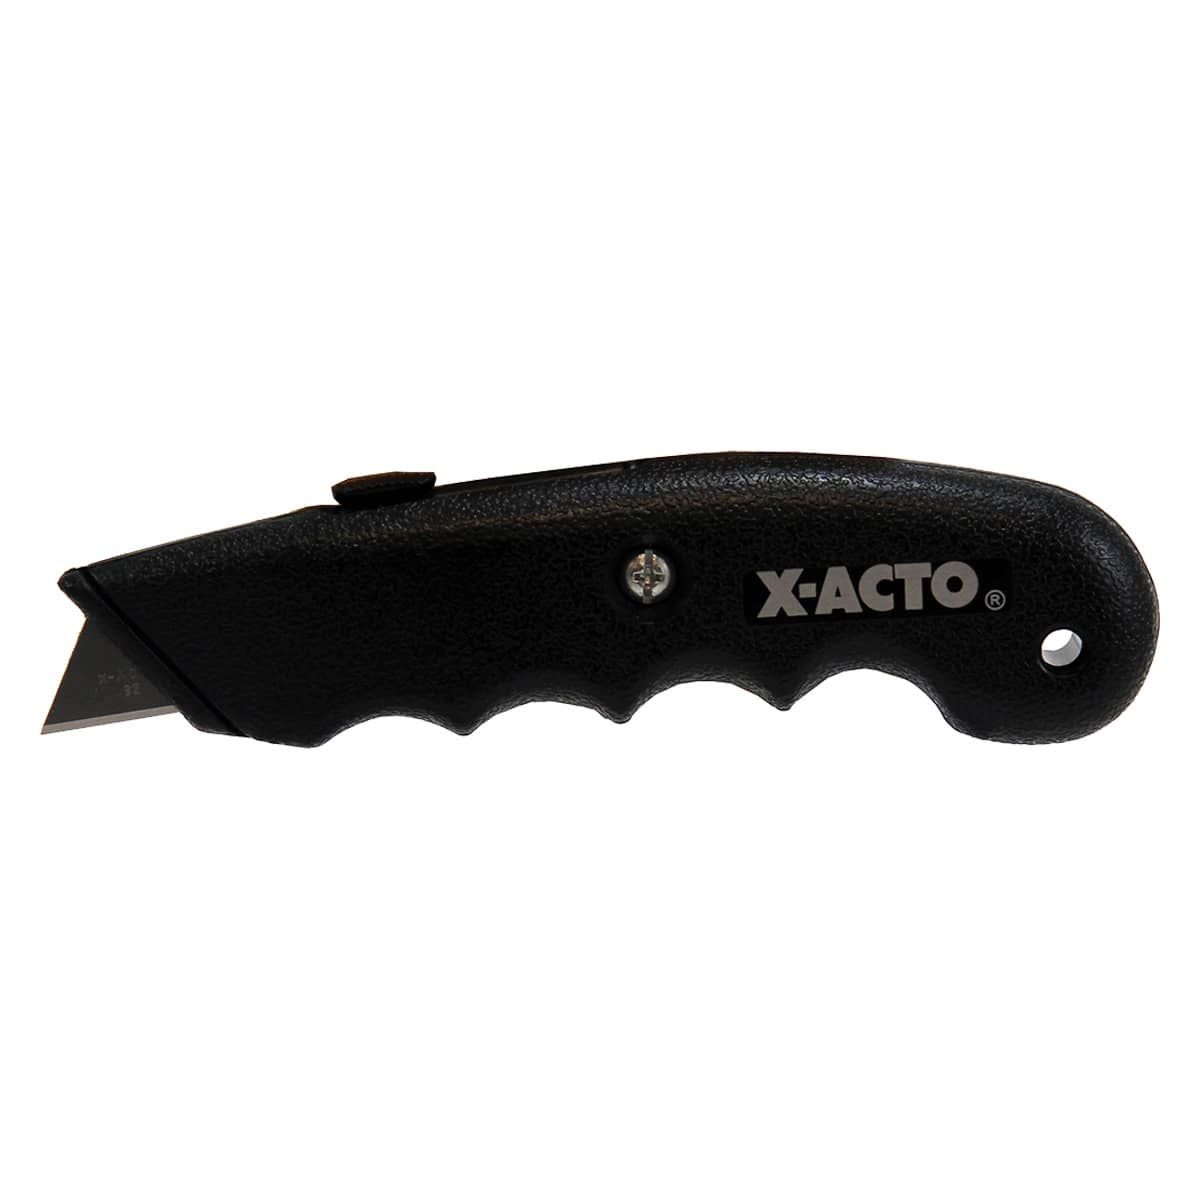 X-Acto All-Purpose Knives and Replacement Blades